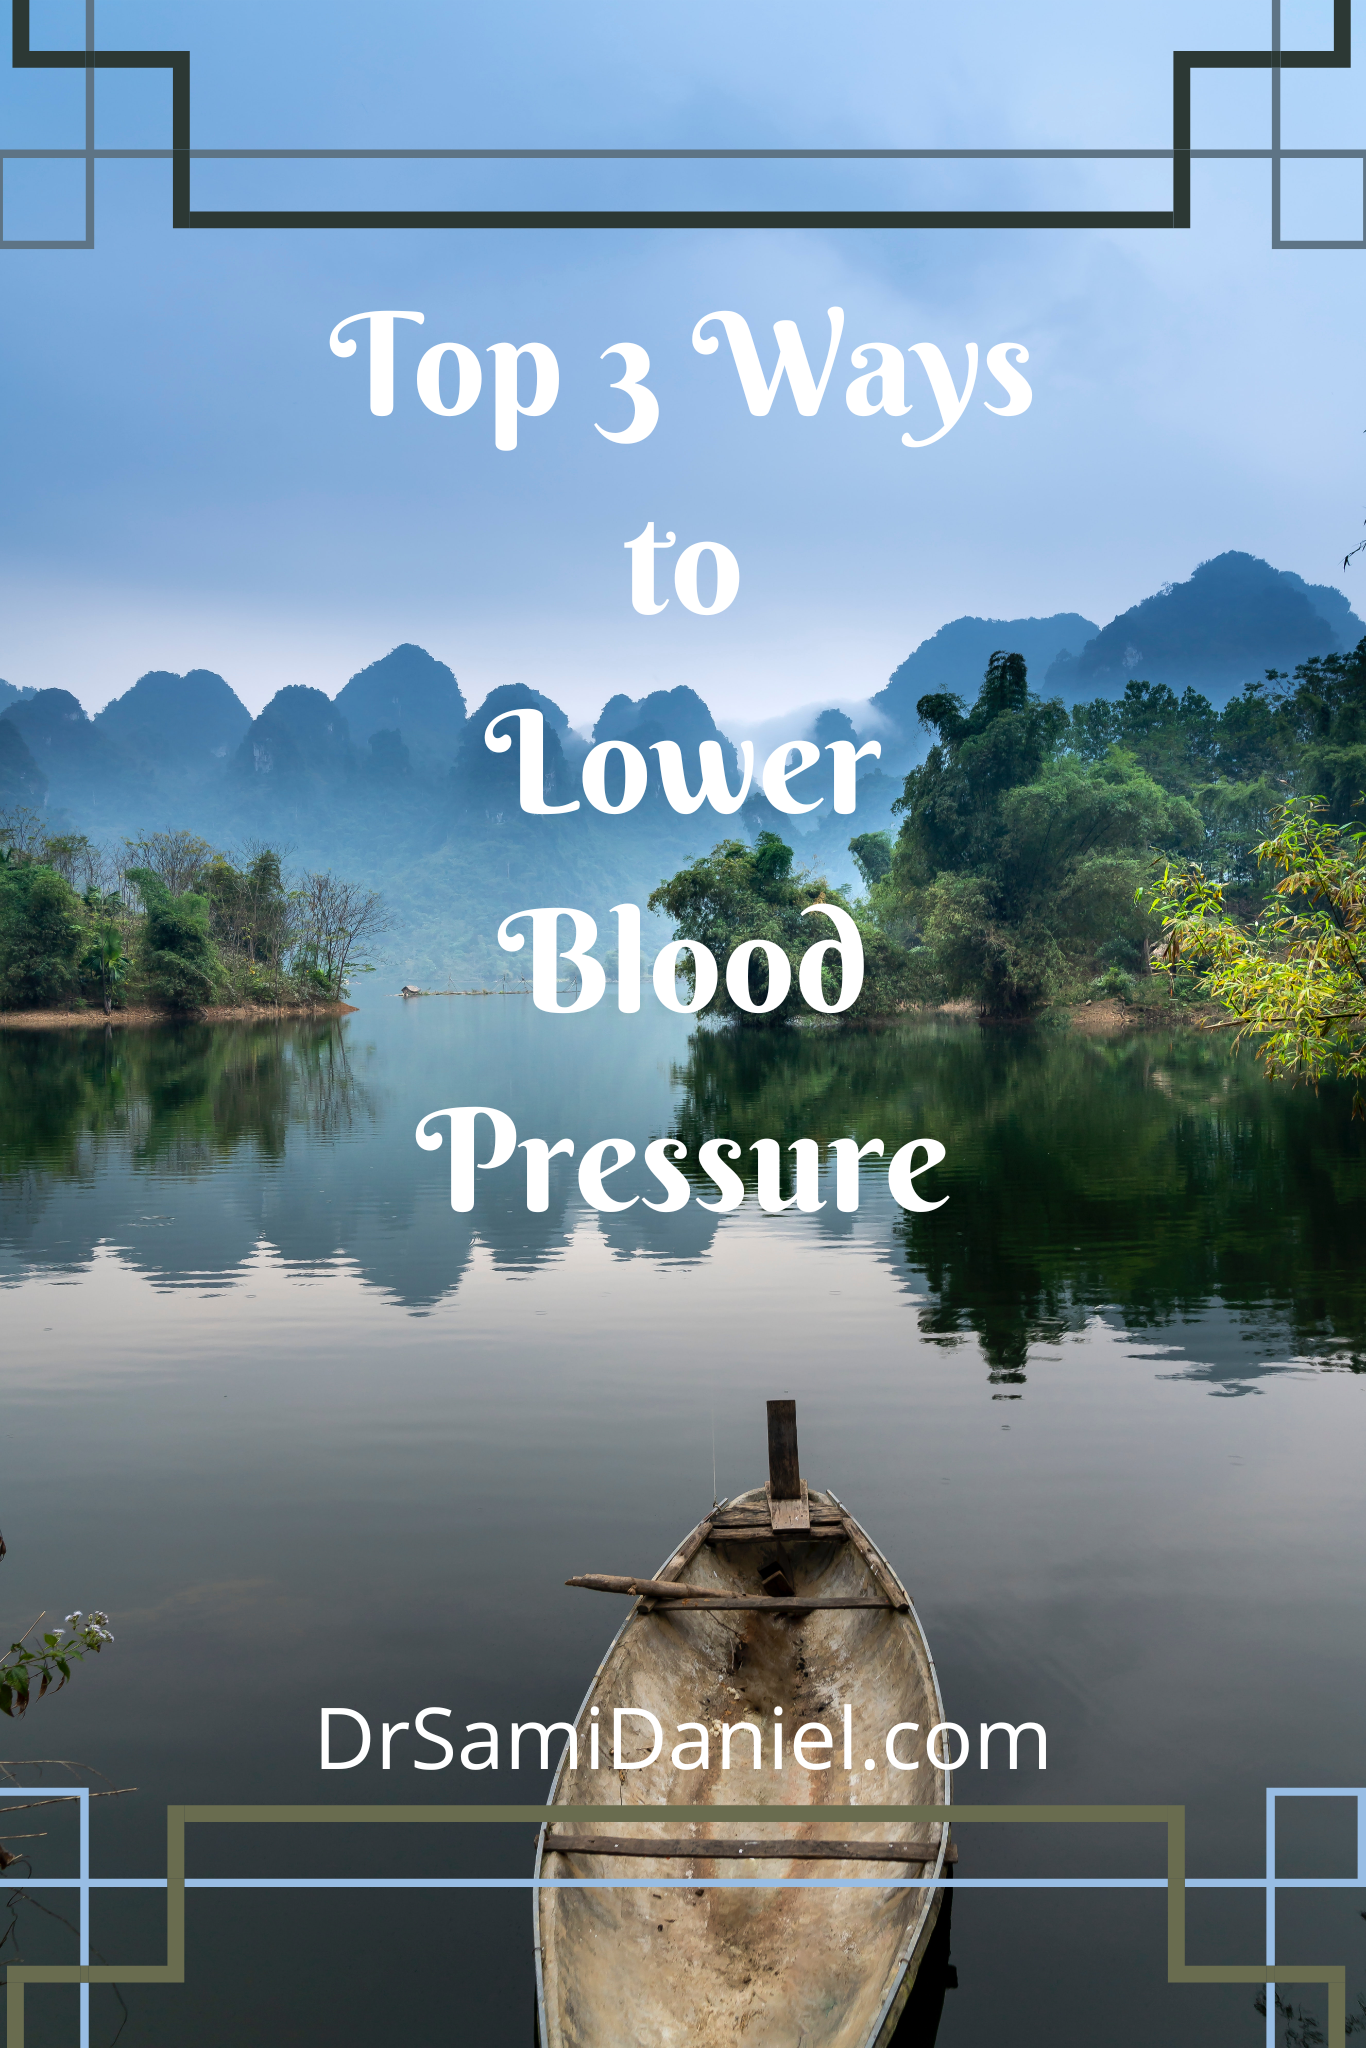 Find out the top 3 ways to lower your blood pressure without the use of medication. Talk with your Doctor and find out what is best for you.